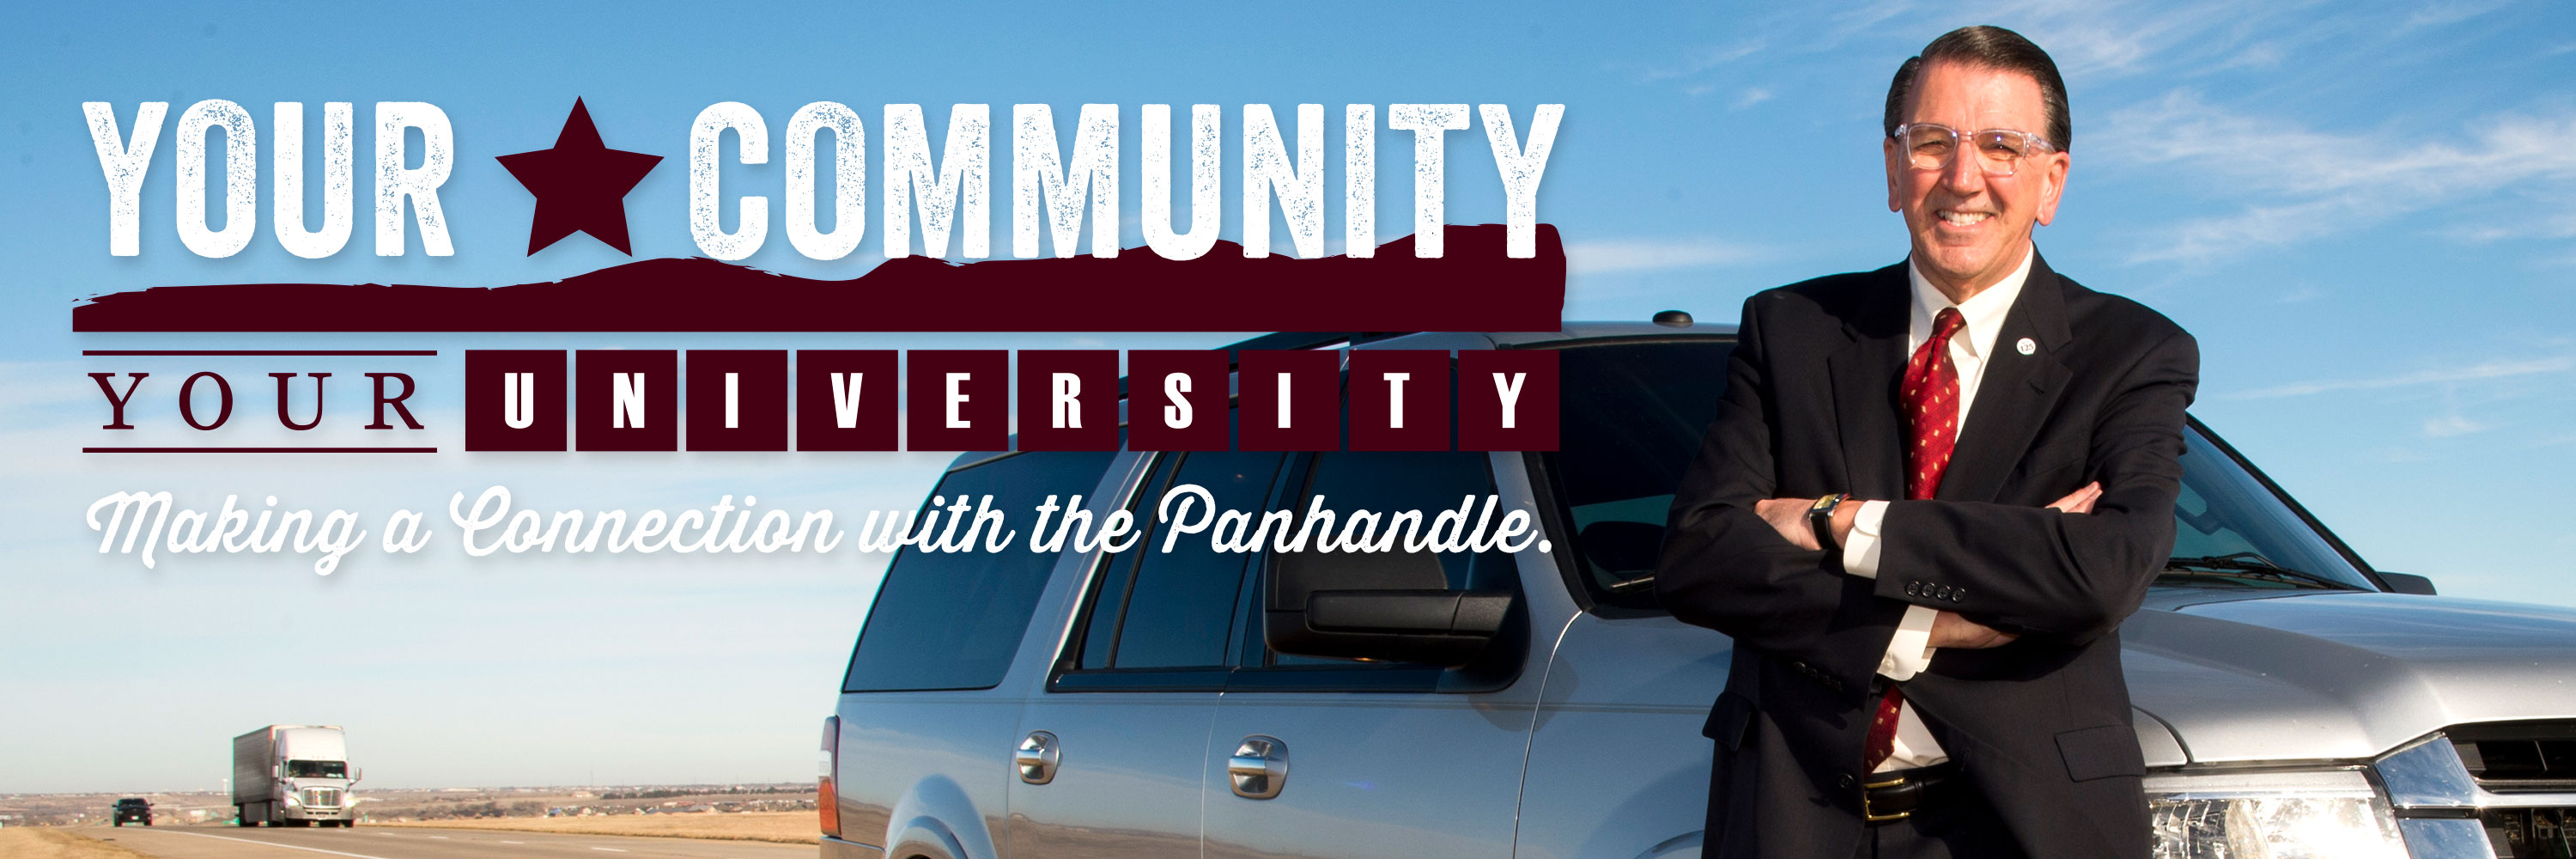 Your Community Your University Banner